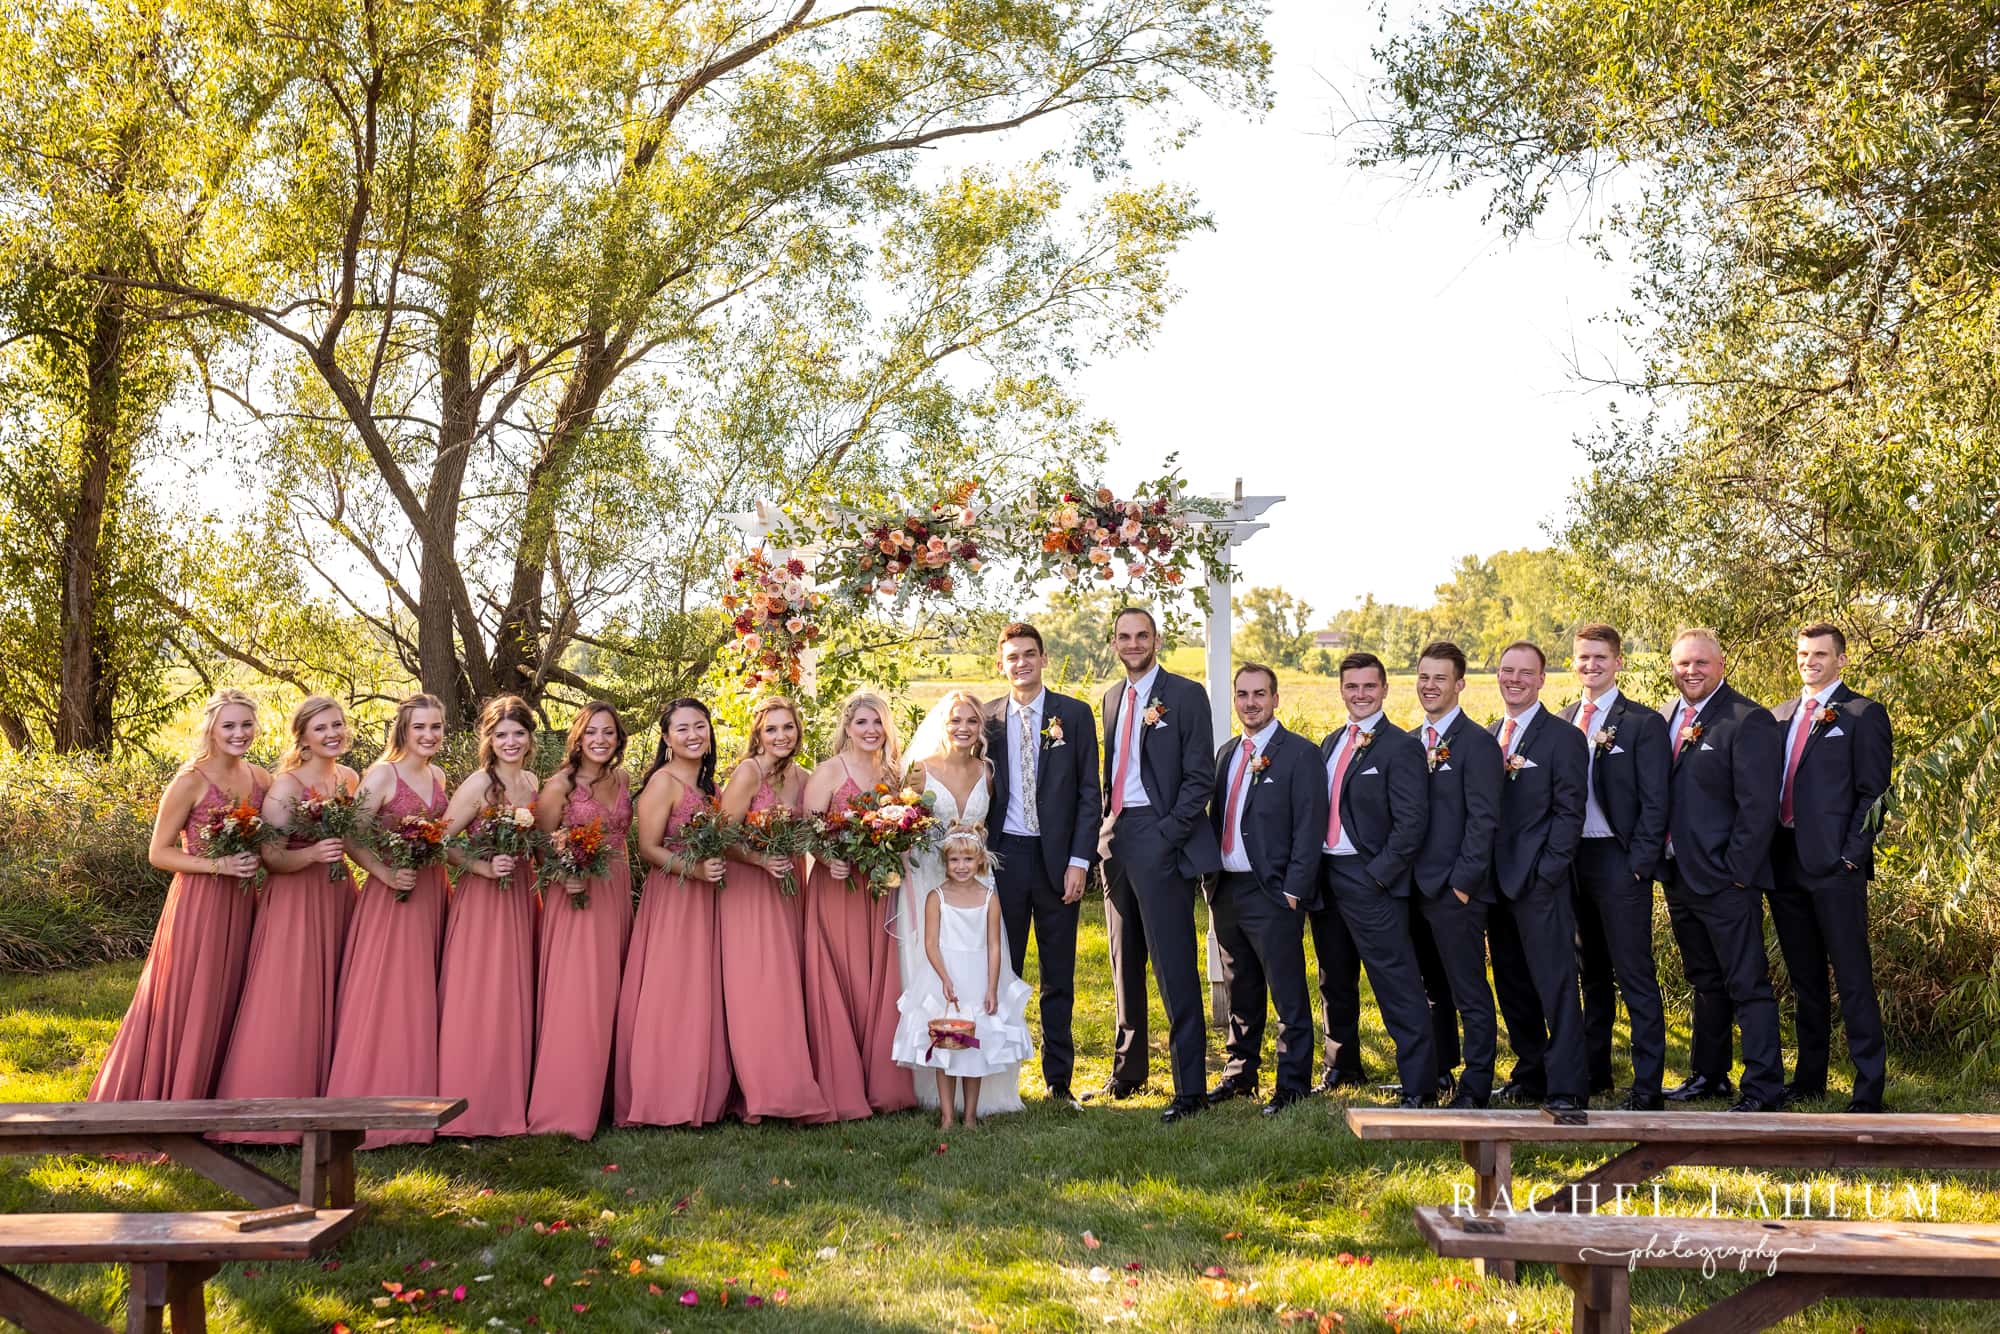 Bride and groom pose with wedding party after outdoor ceremony at The Cottage Farmhouse. 